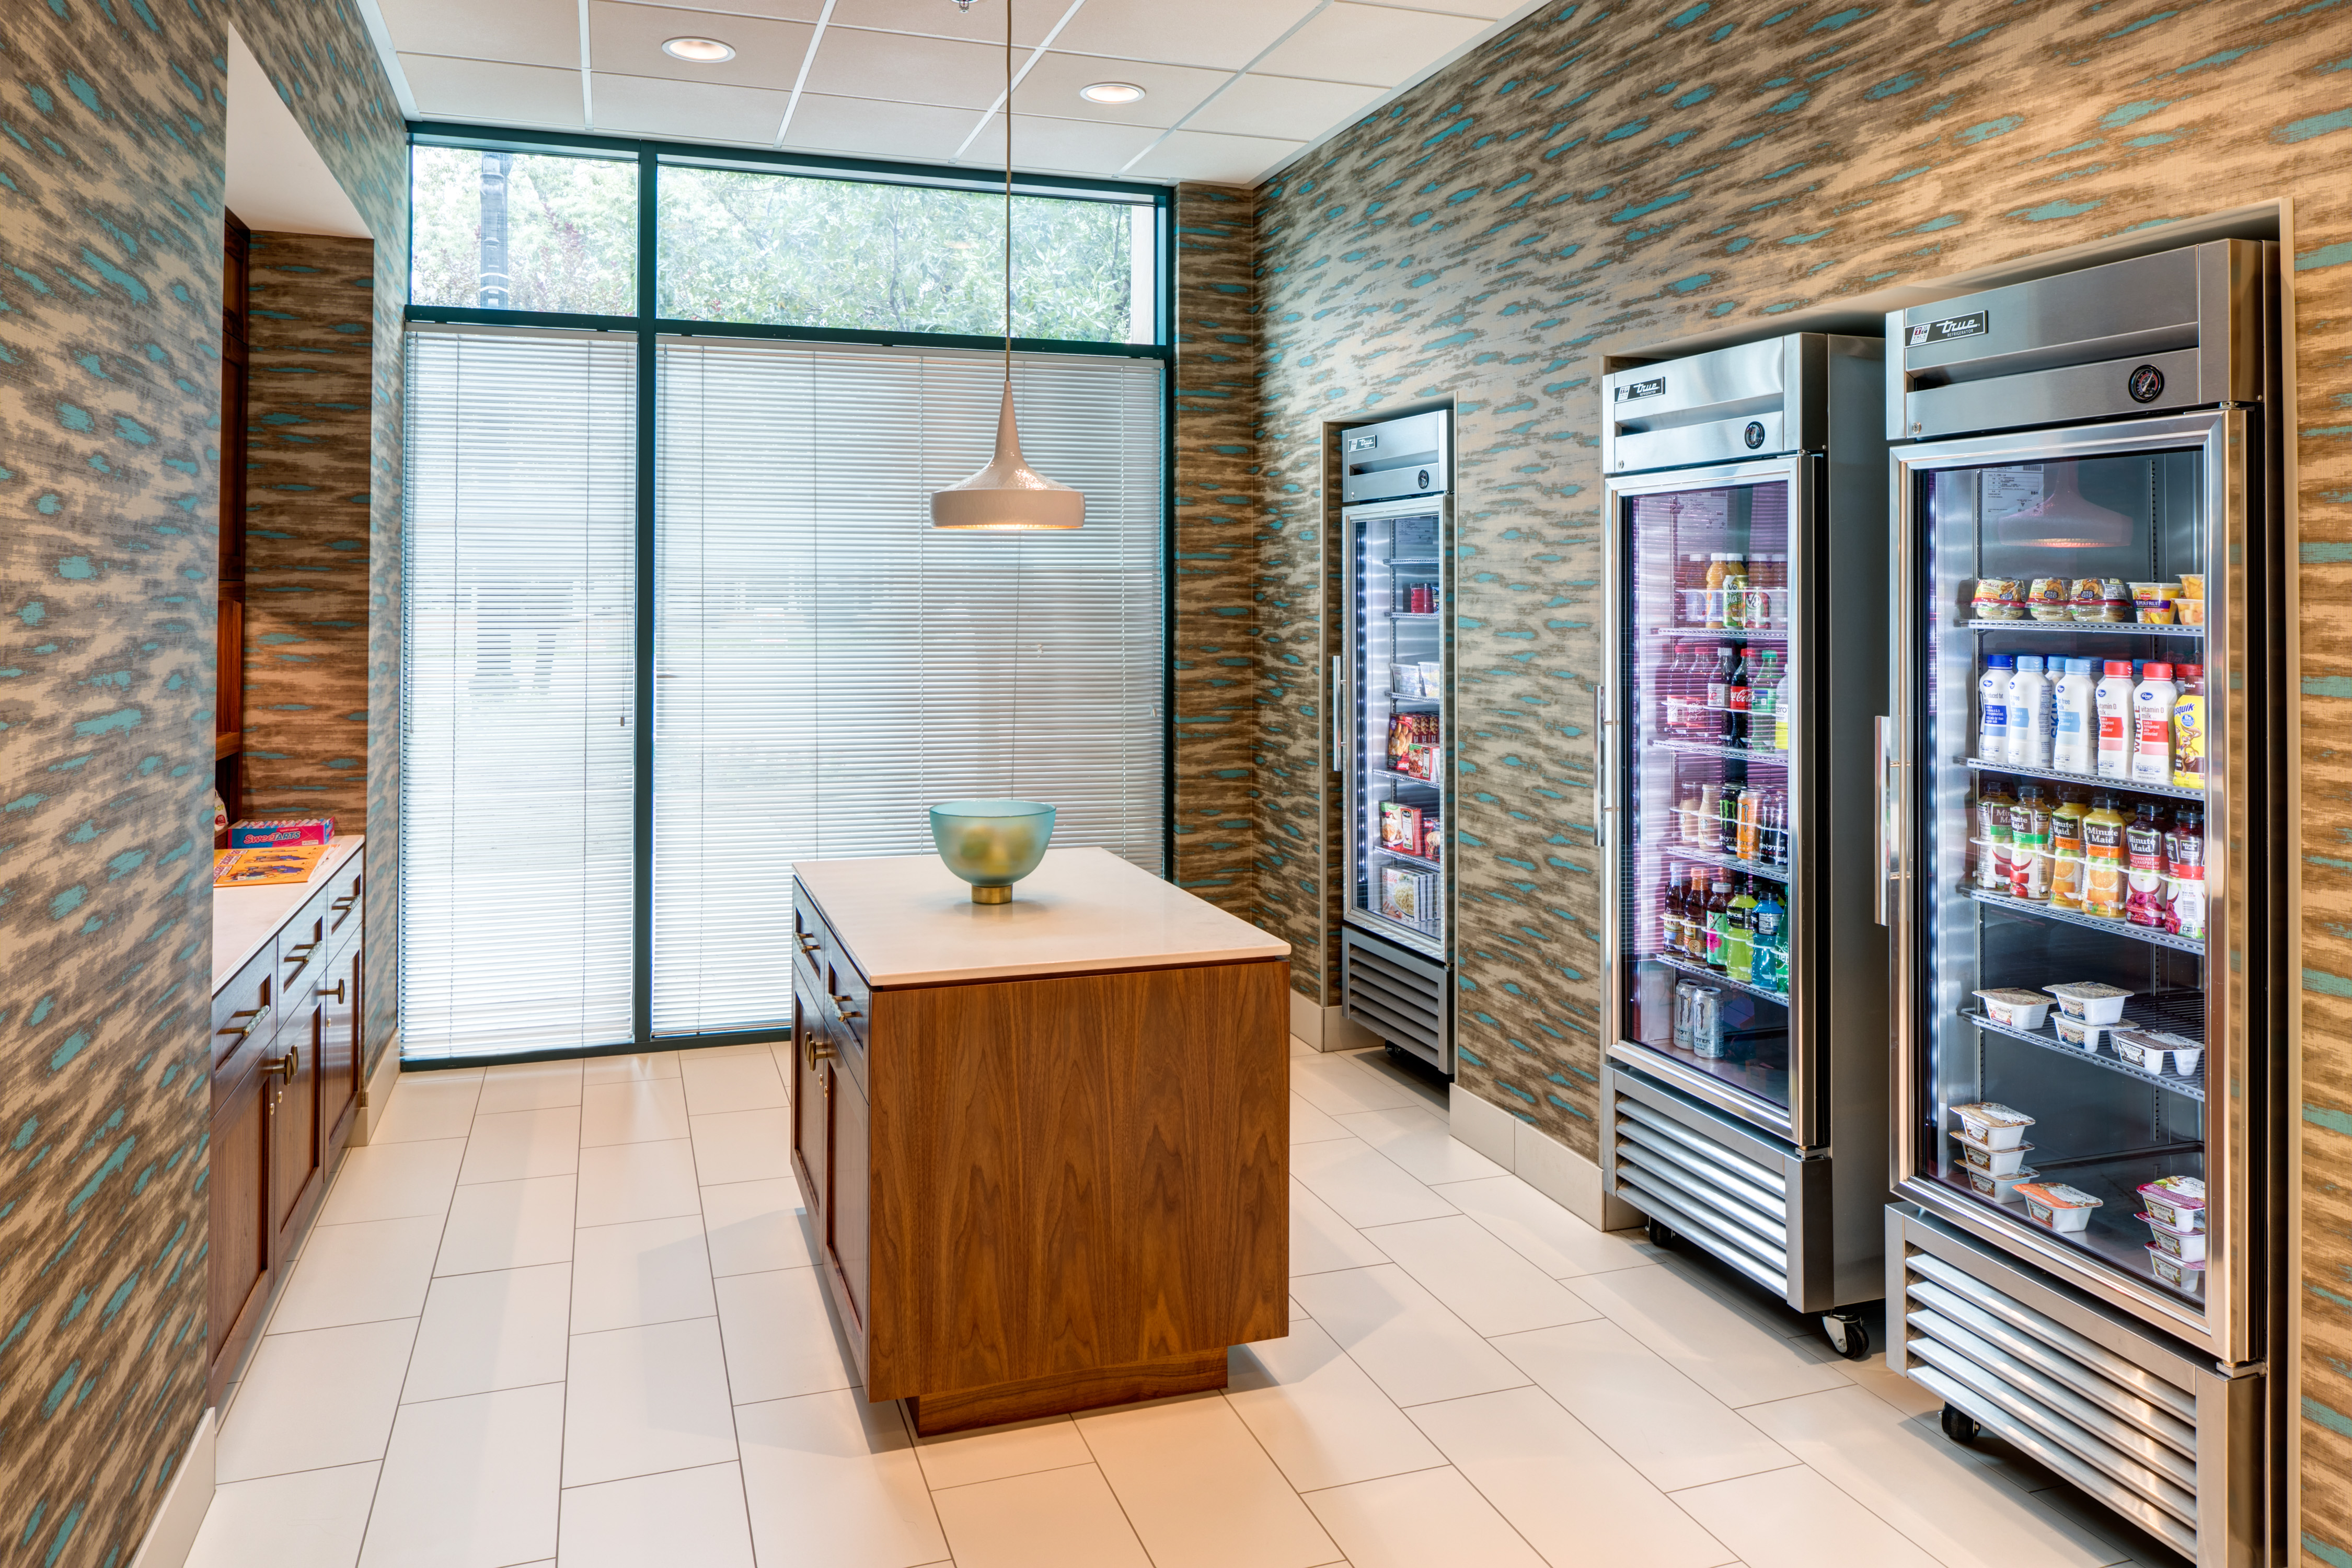 Snack Shop Suite With Beverages and Frozen Food Selections